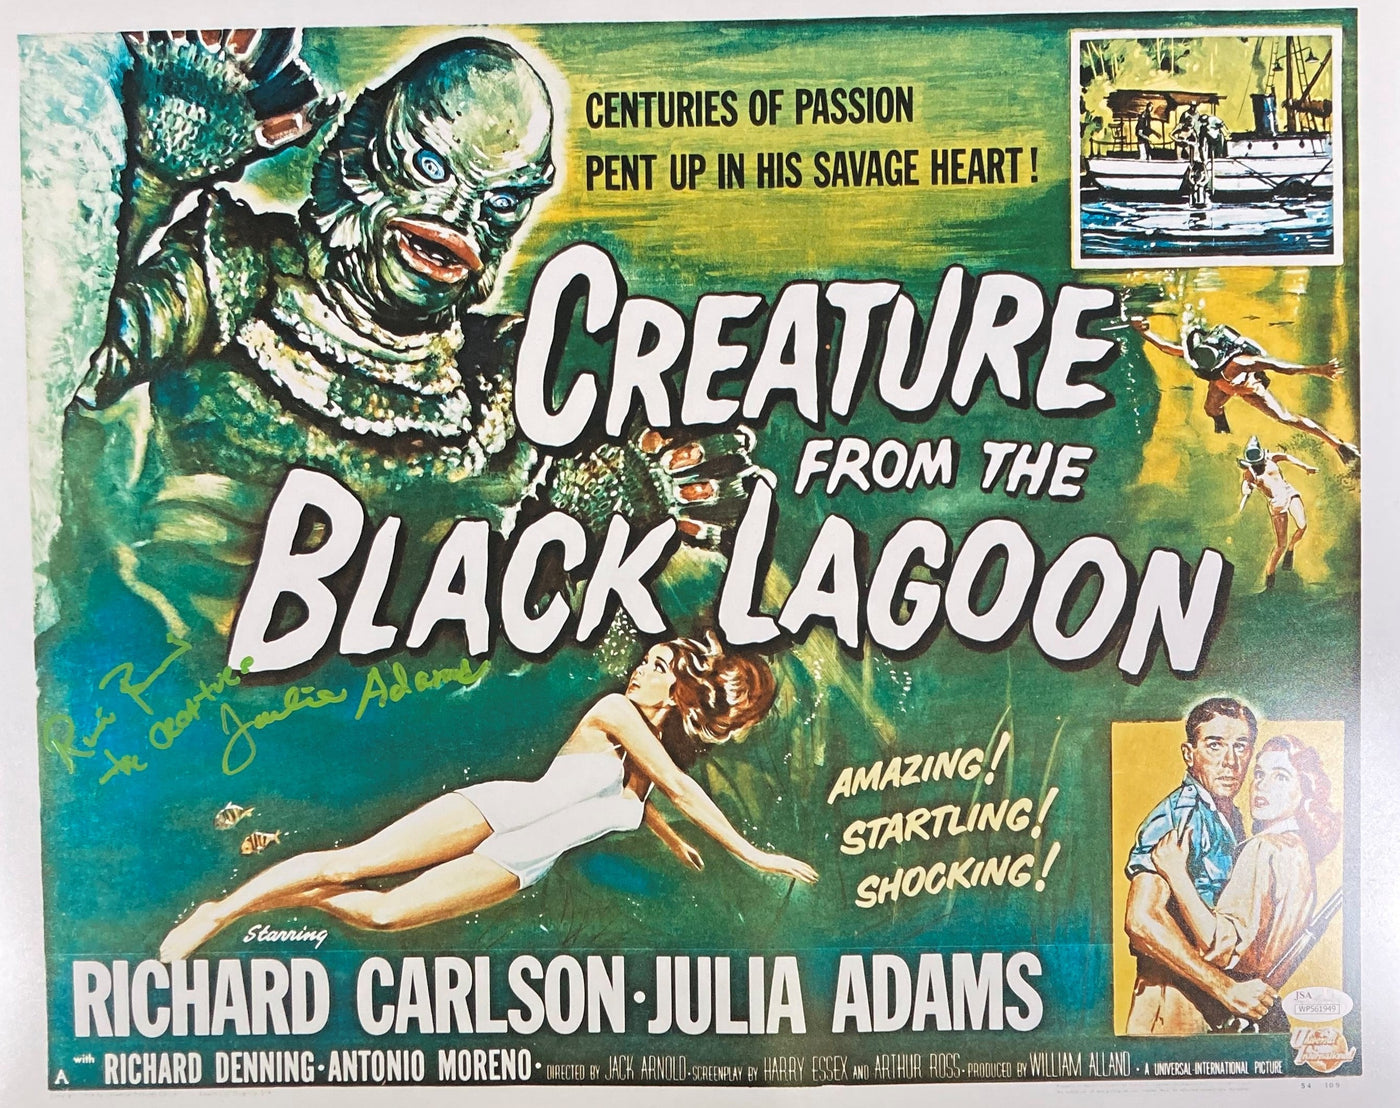 Ricou Browning & Julie Adams Signed 16x20 Photo Creature from the Black Lagoon JSA